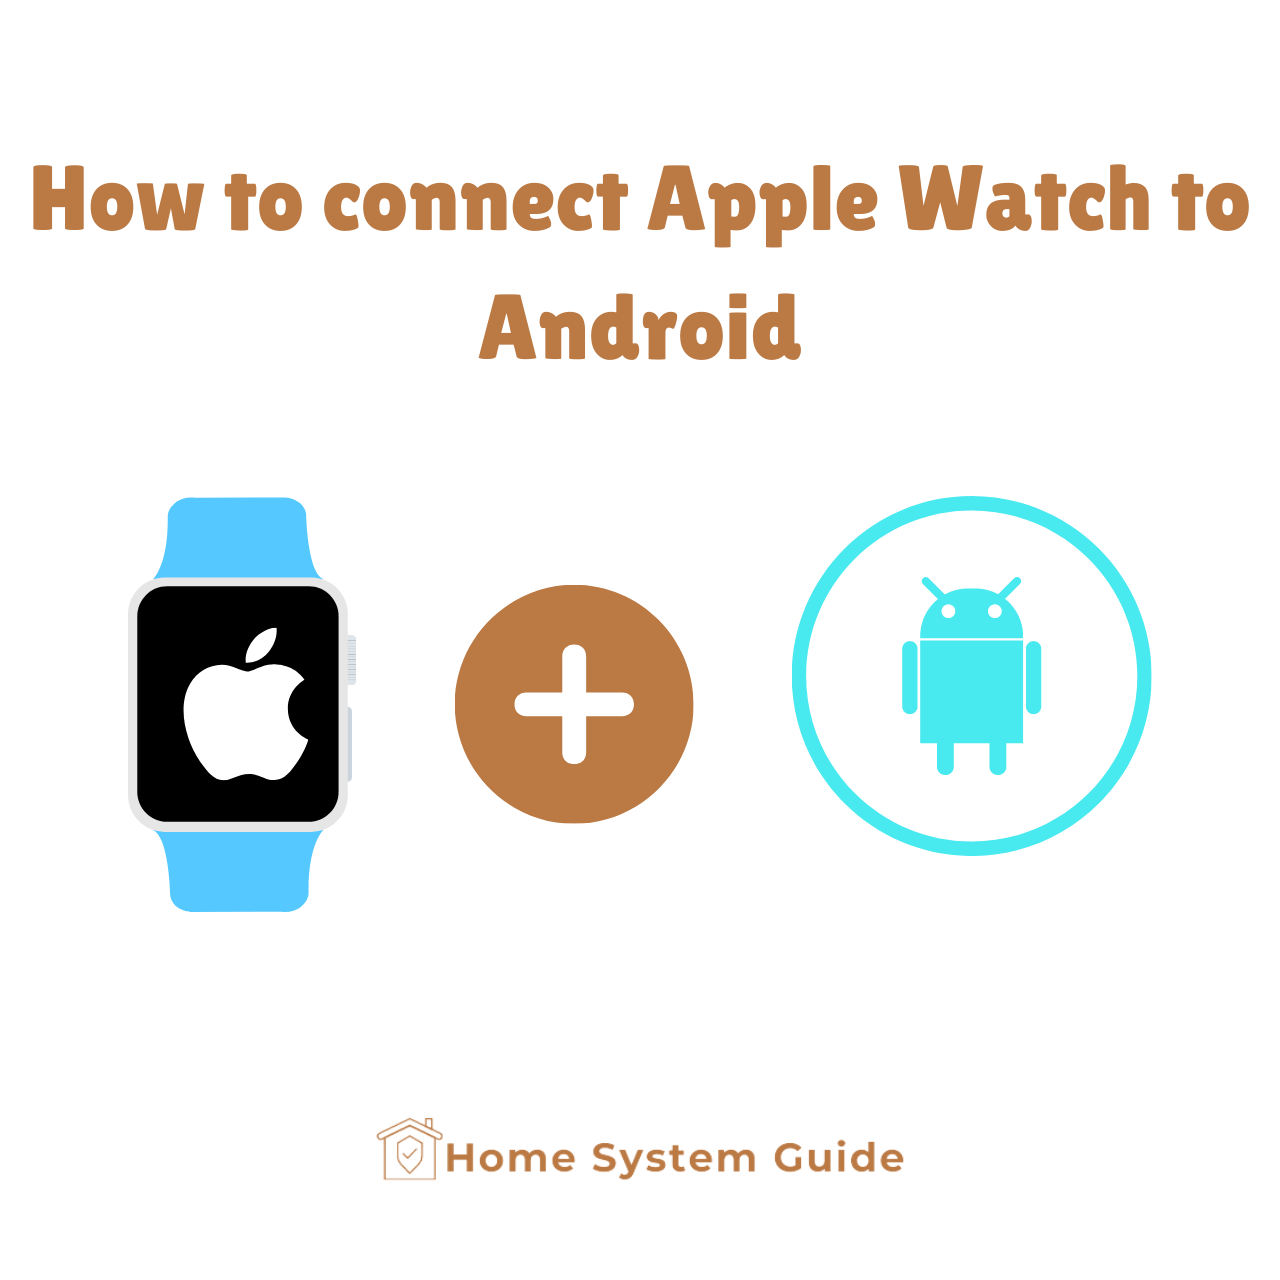 How to connect Apple Watch to Android